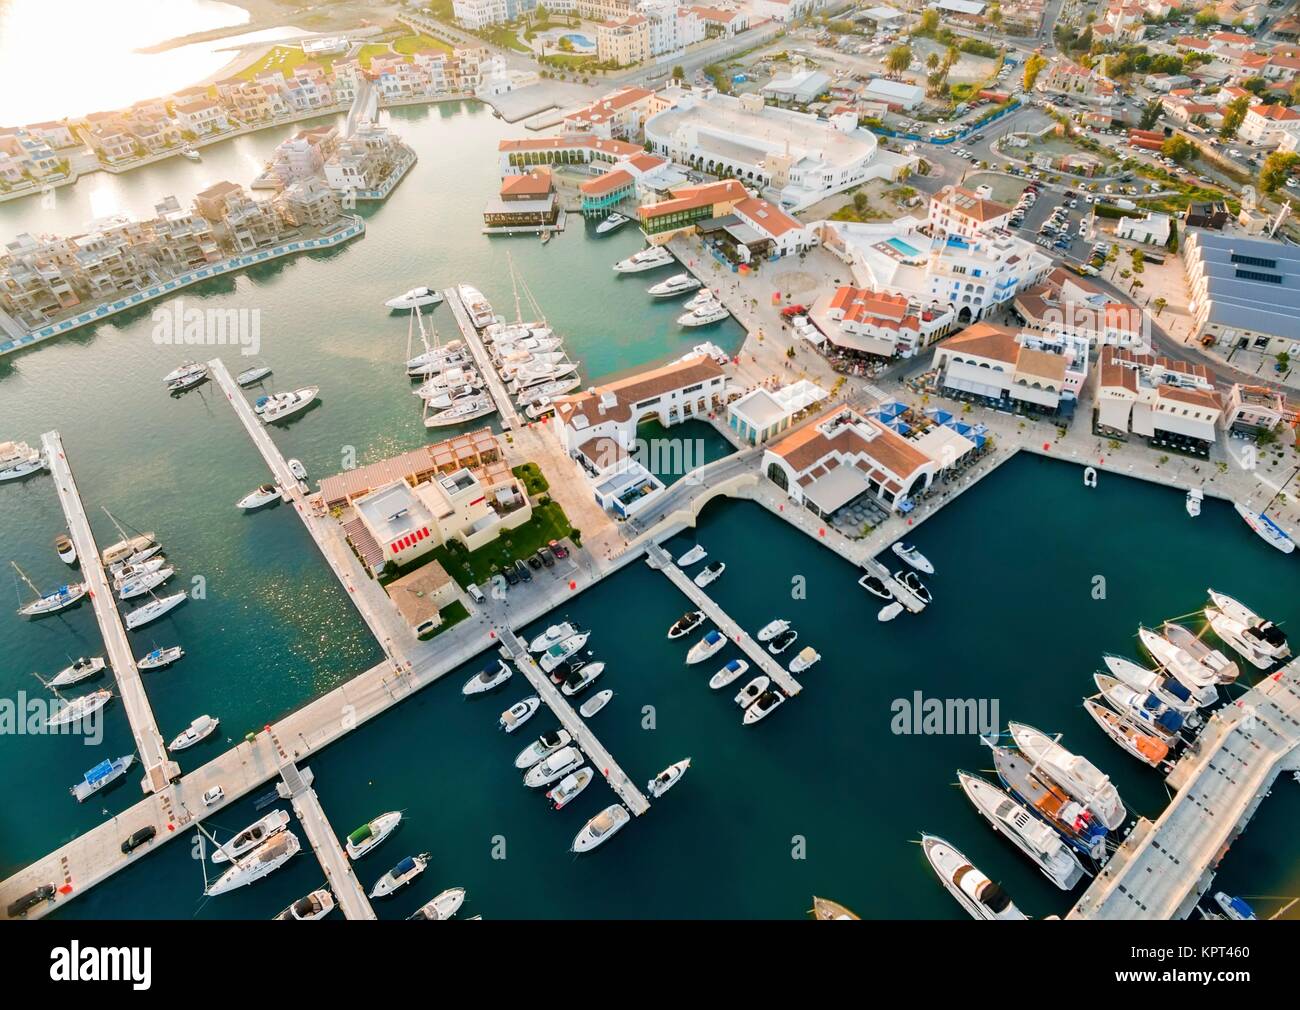 Aerial view of the beautiful Marina in Limassol city in Cyprus, the beach, boats, piers, villas and commercial area. A very modern, high end and newly developed space where yachts are moored and it's perfect for a waterfront promenade. Stock Photo